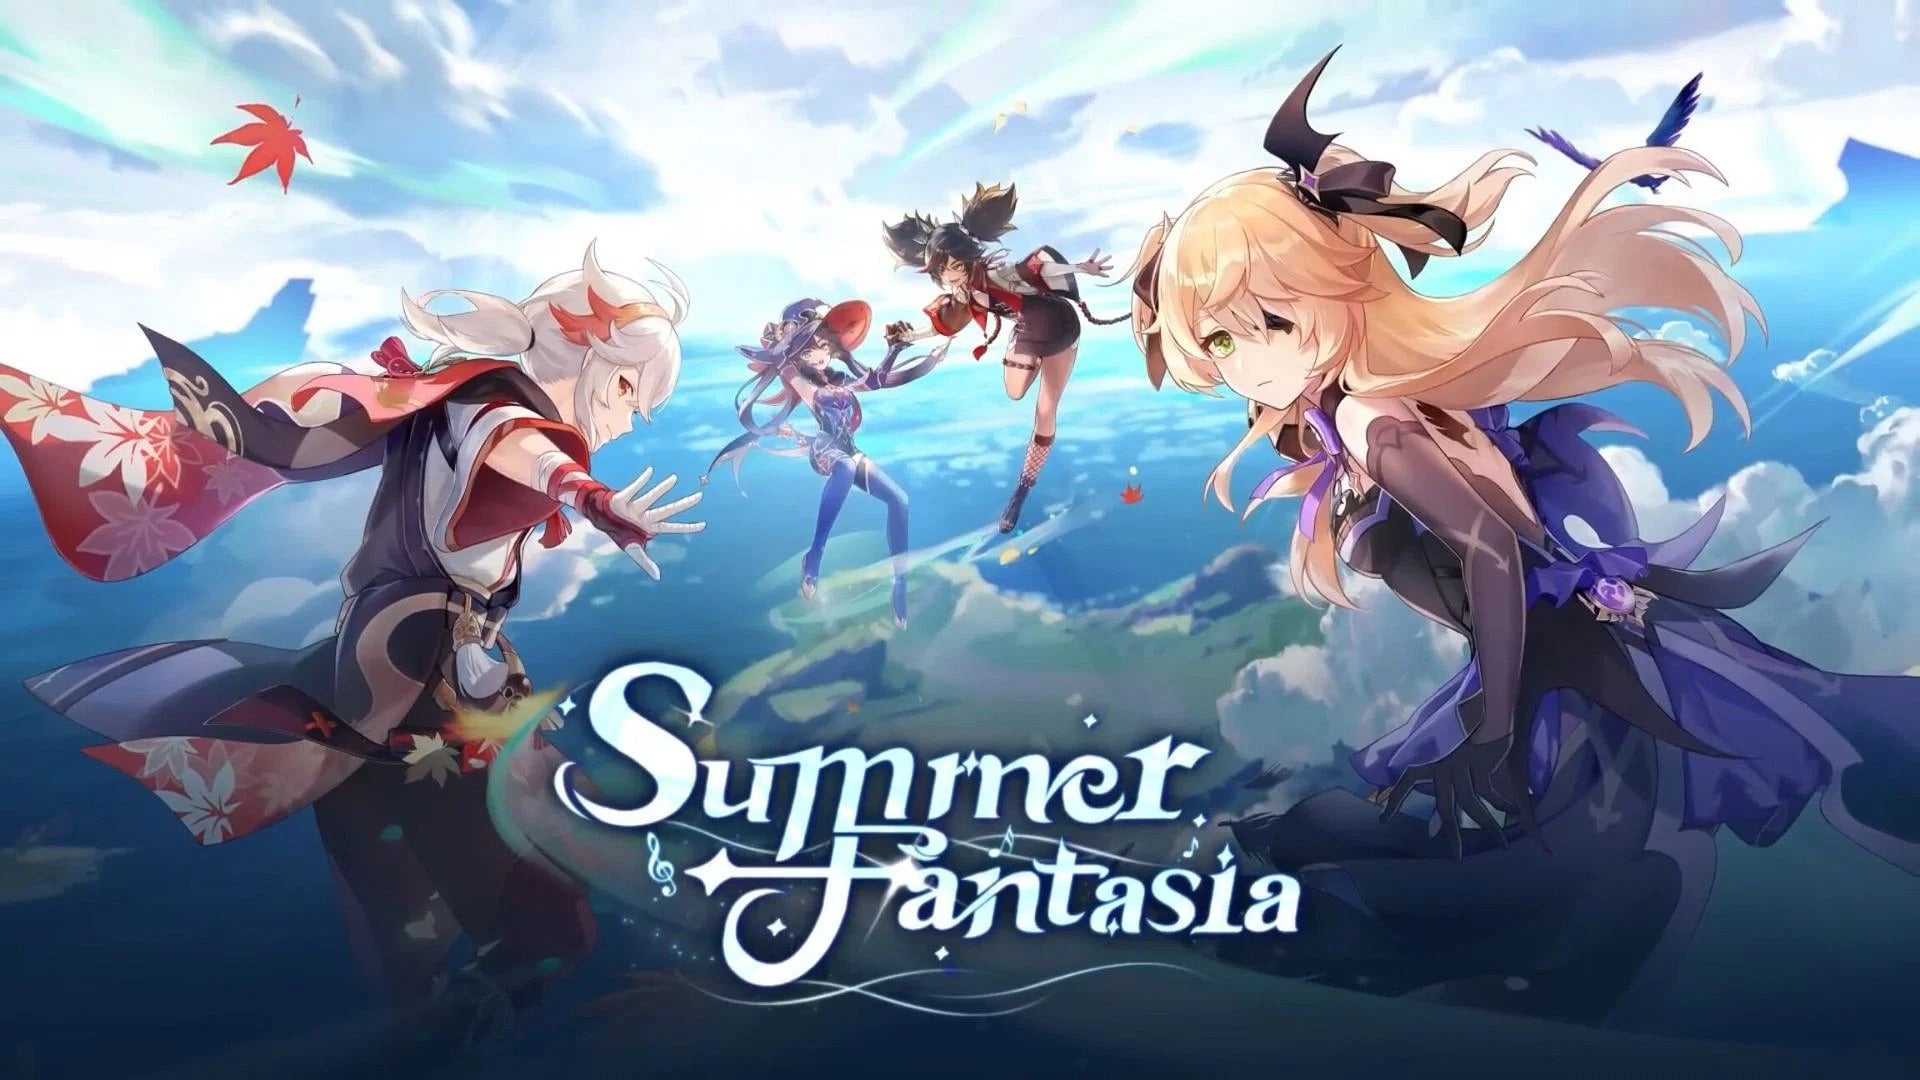 Image for Genshin Impact: How to start Summer Fantasia - Summertime Odyssey I and Mona's Story Quest